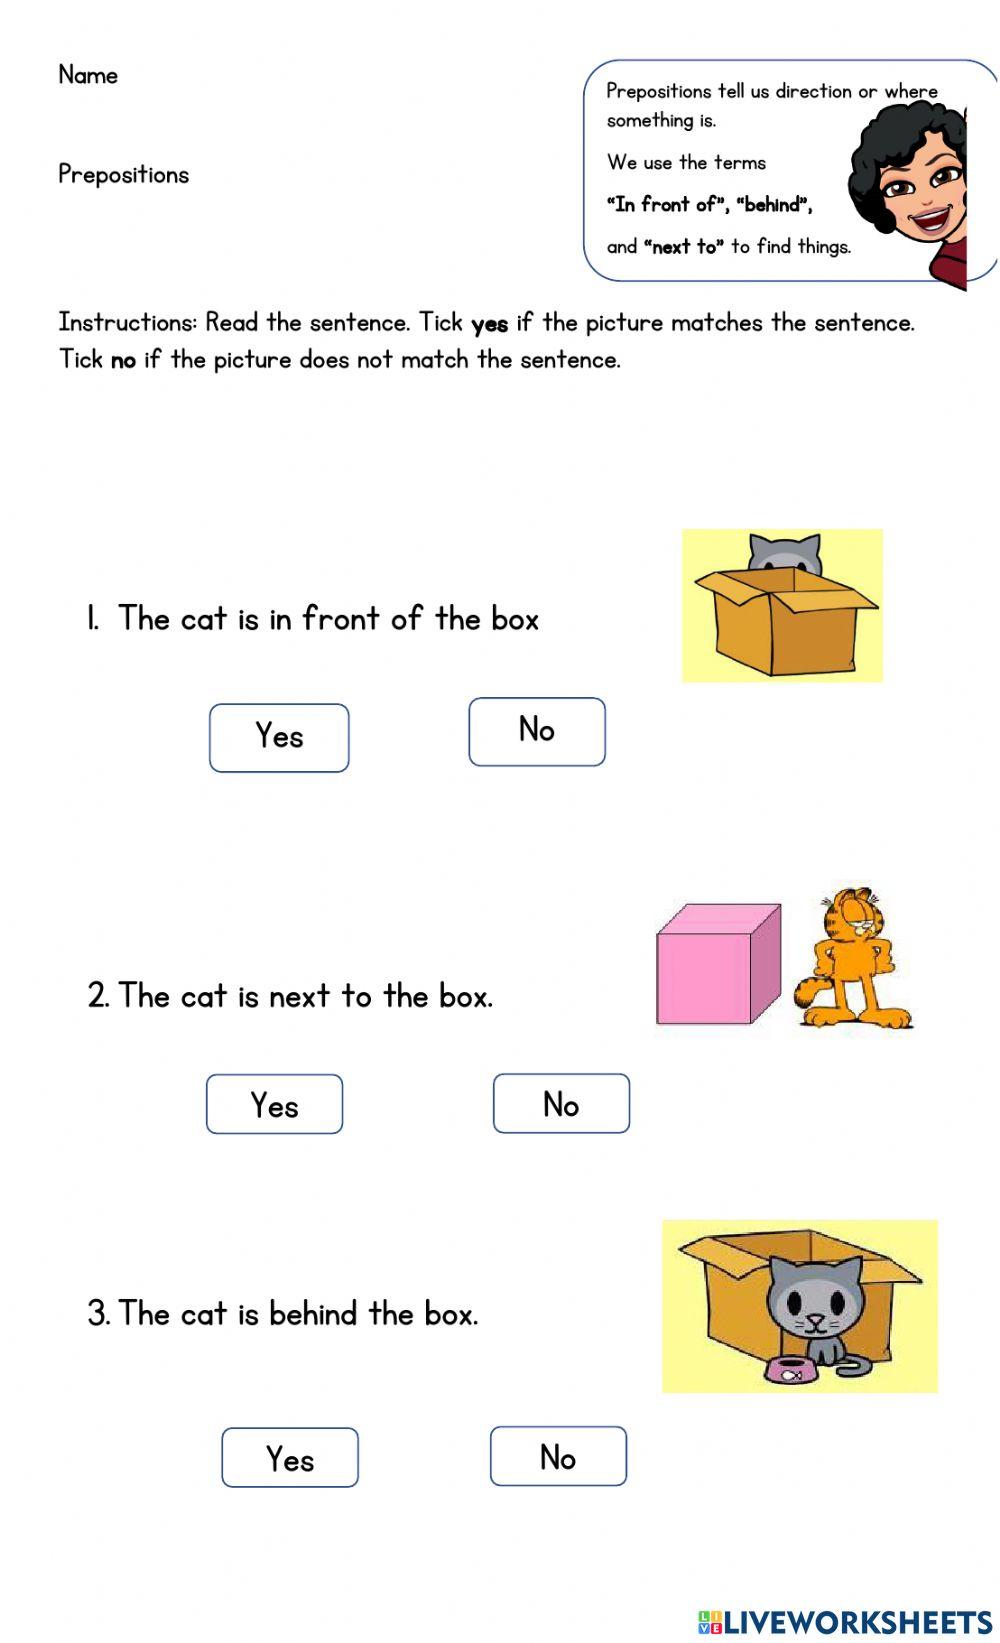 Prepositions (in front of, next to, behind)